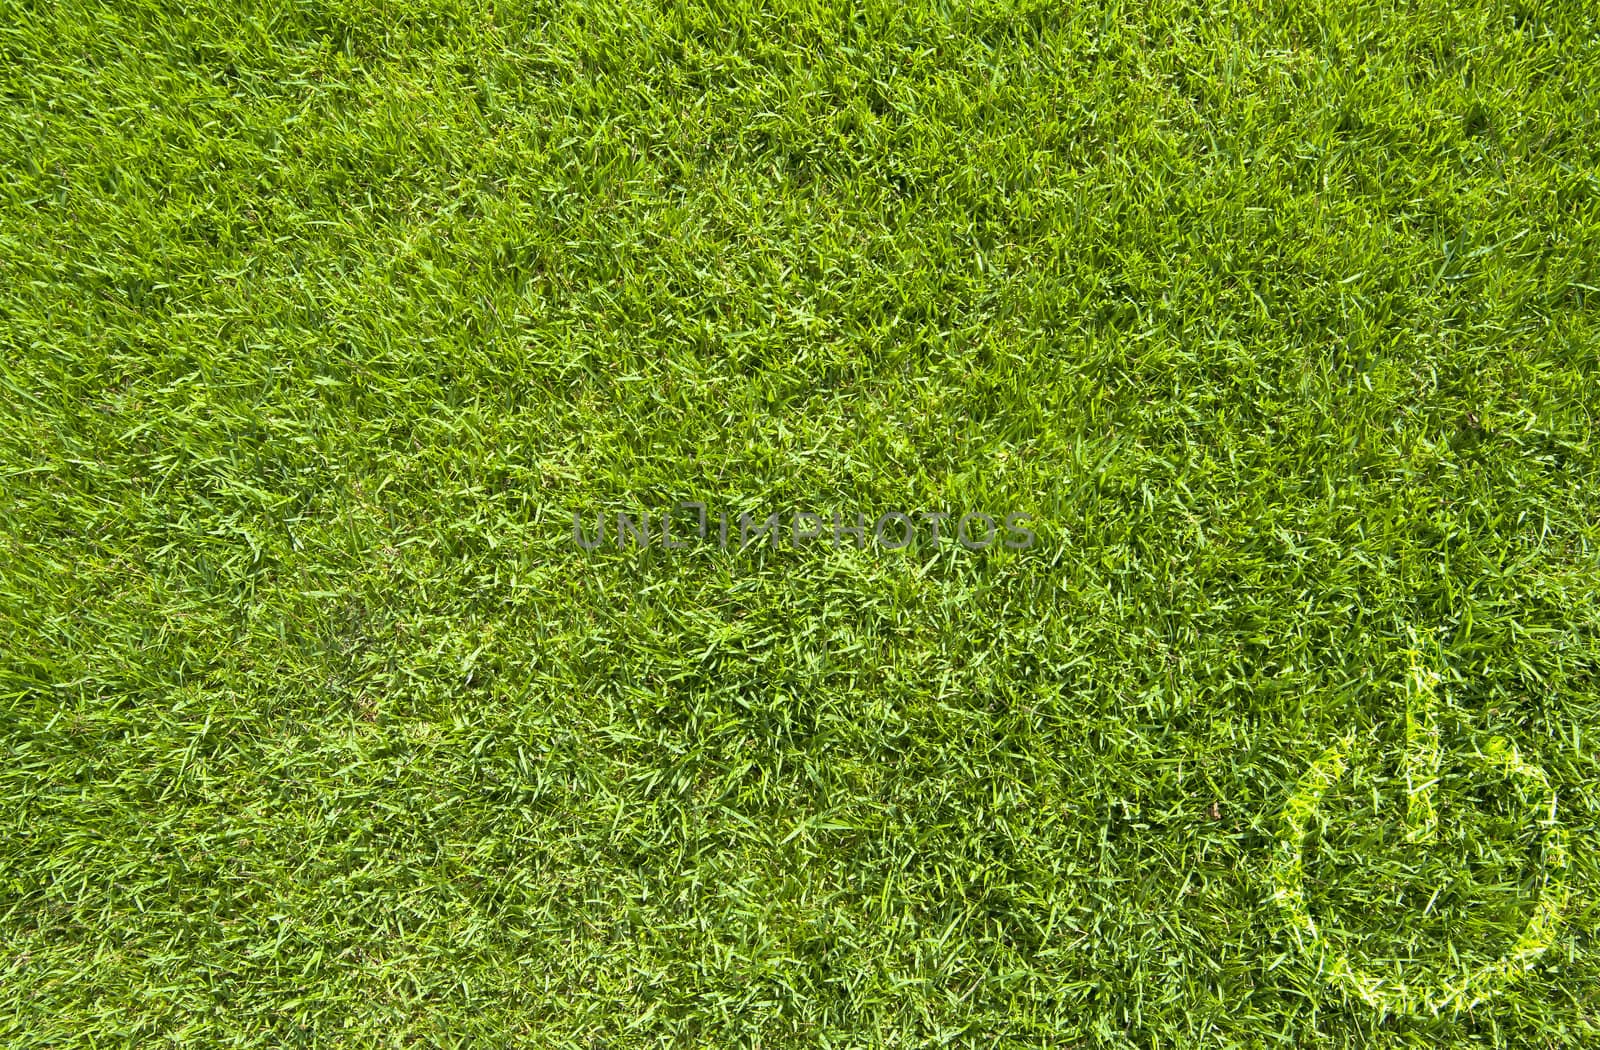 Shutdown icon on green grass texture and background 